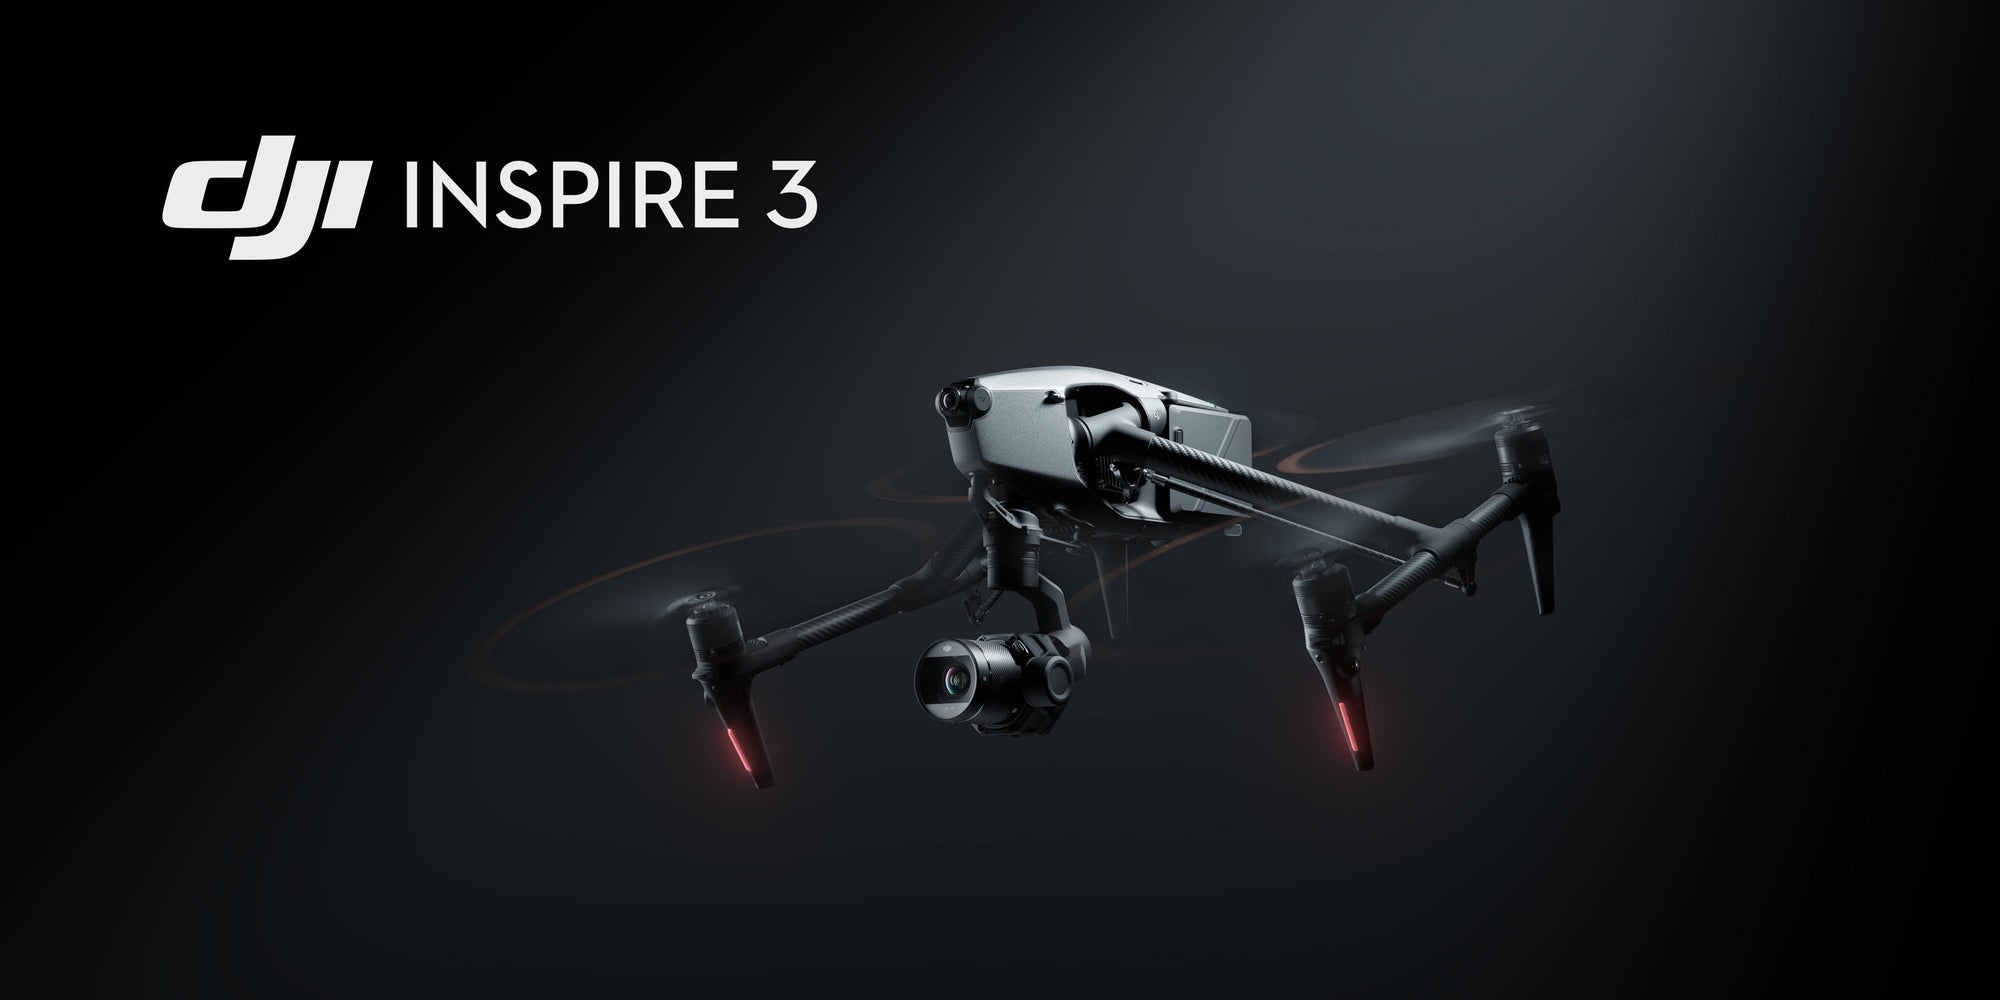 DJI Inspire 3: The Next Step In Aerial Cinematography